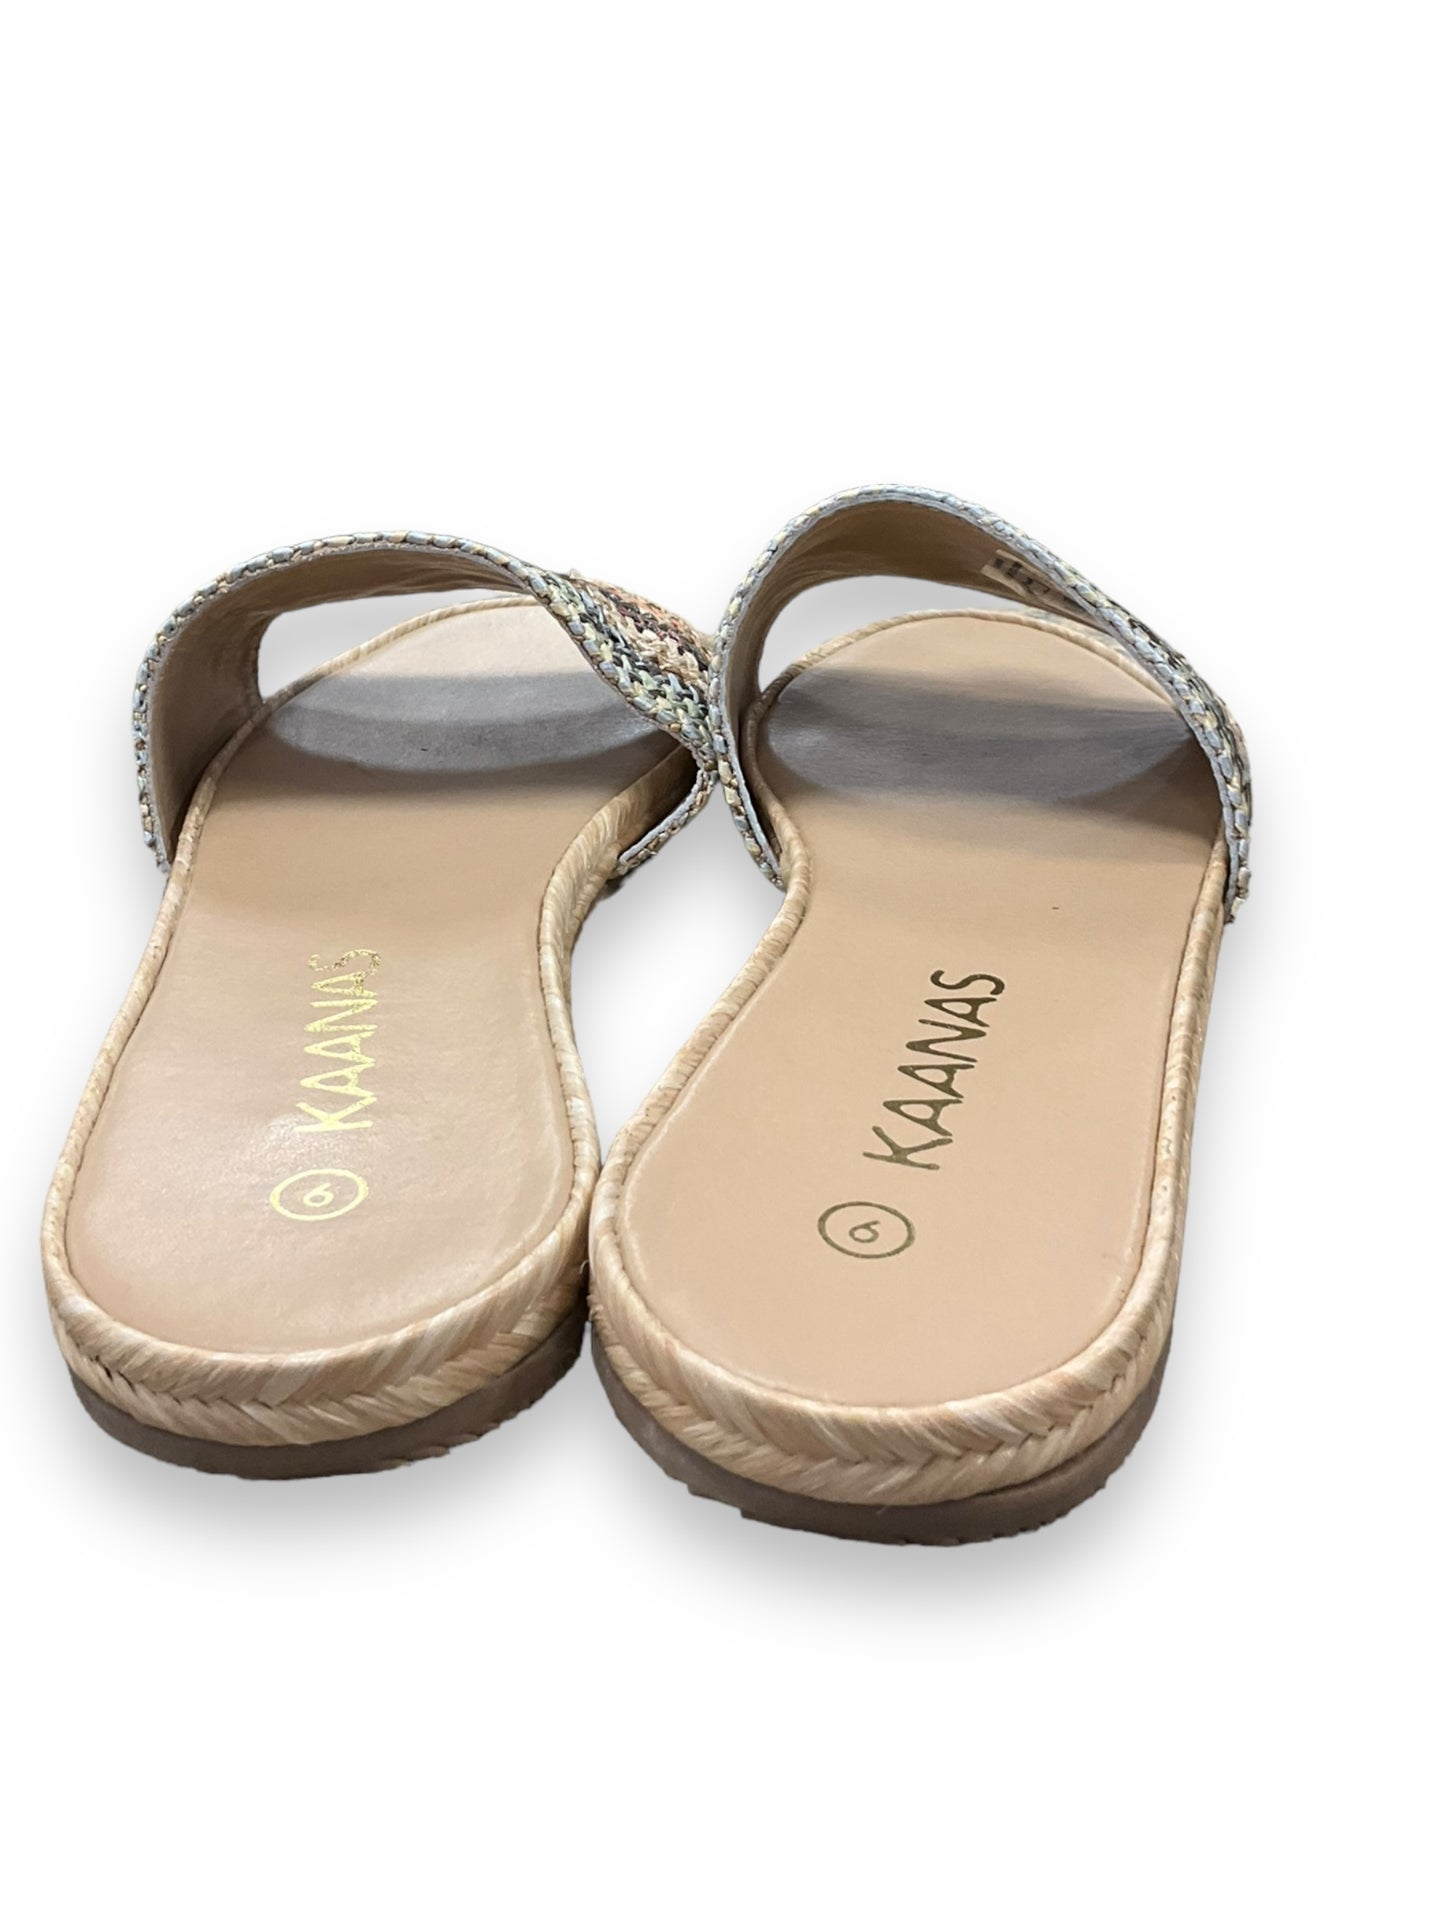 Sandals Flats By Cmc  Size: 9